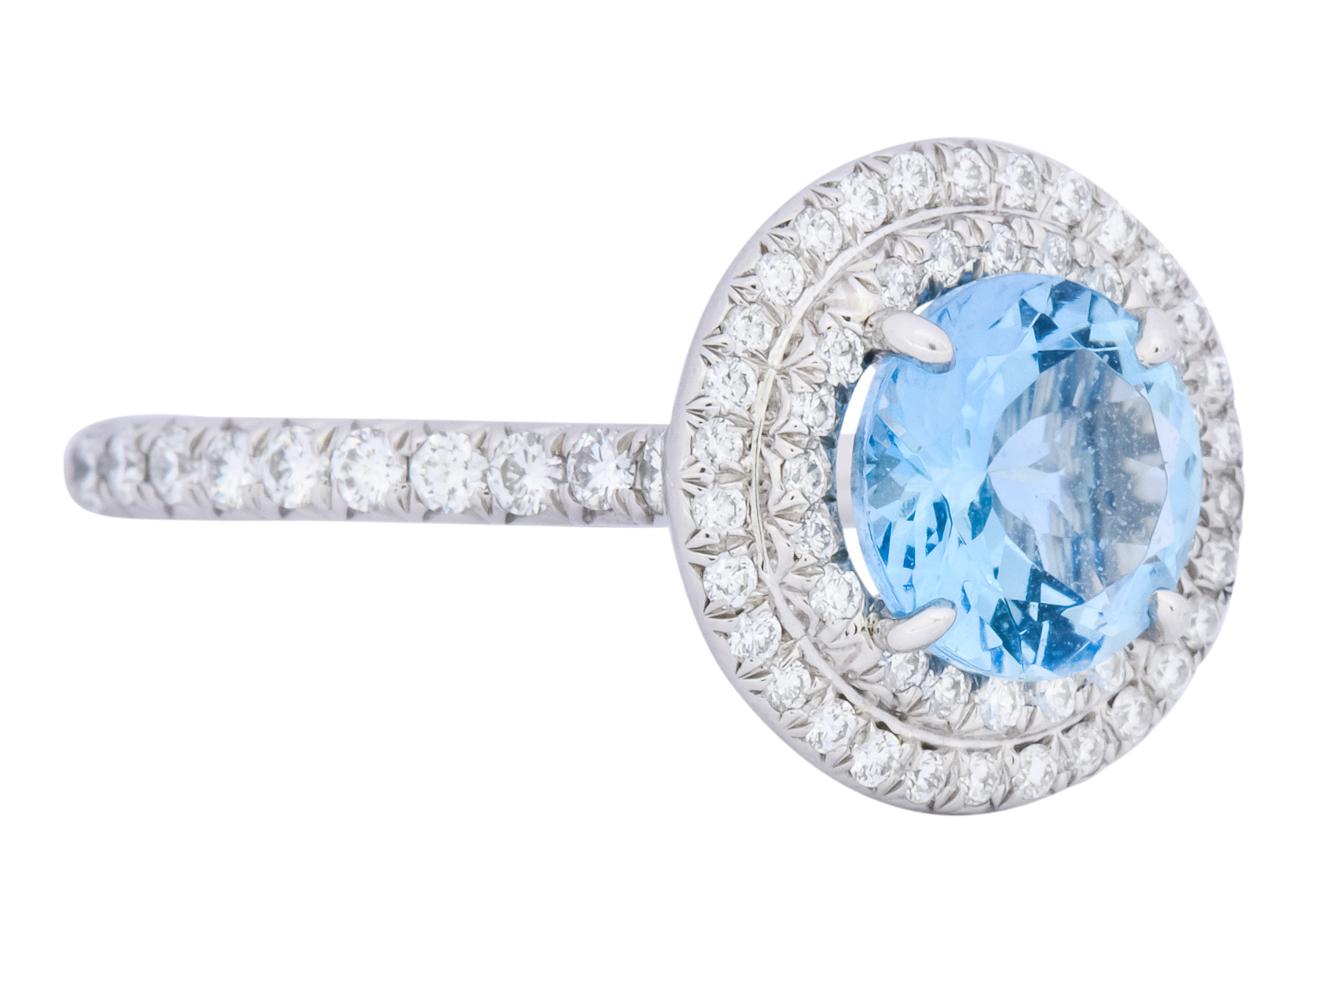 Centering a round cut aquamarine weighing approximately 1.25 carat, transparent medium-dark sea blue in color

Surrounded by a double halo and shoulders bead set with round brilliant cut diamonds weighing approximately 0.60 carat total, F/G color